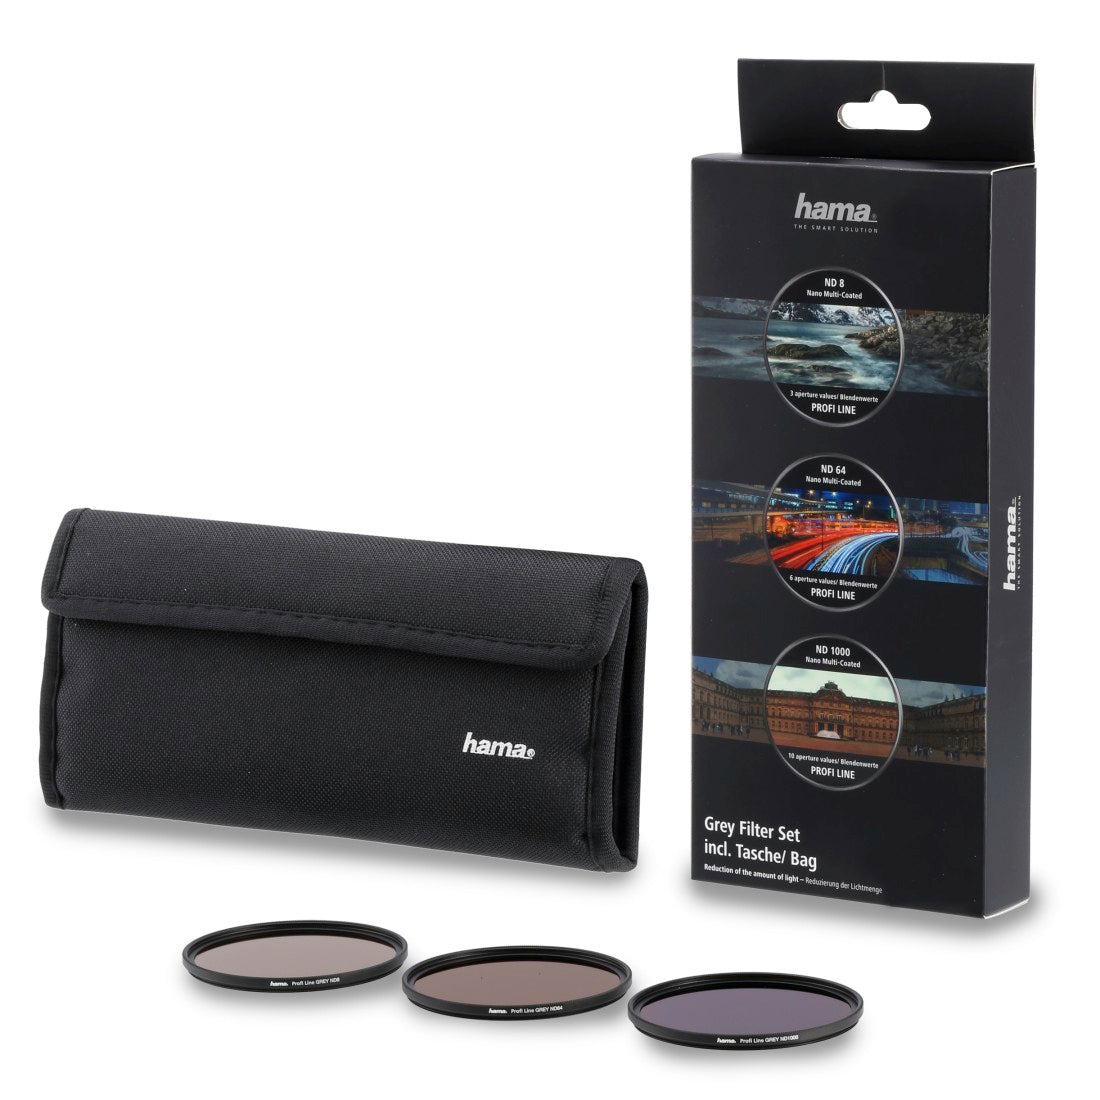 ND8, ND64, ND1000 Grey Filter Kit, 82 mm, with Filter Bag-Accessories-HAMA-computerspace